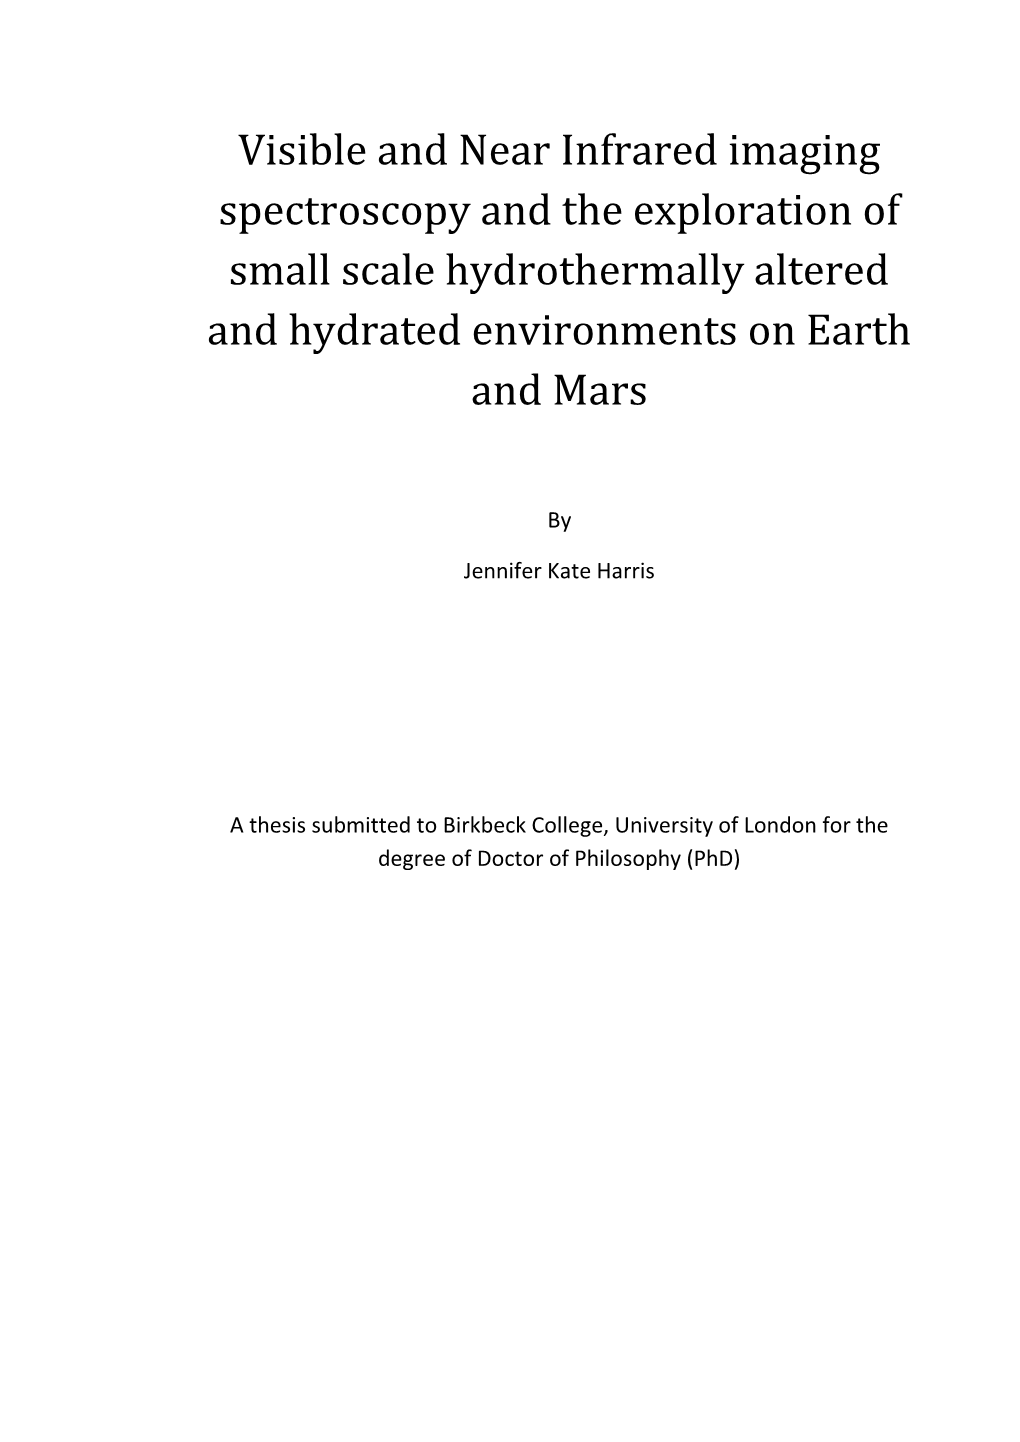 Visible and Near Infrared Imaging Spectroscopy and the Exploration of Small Scale Hydrothermally Altered and Hydrated Environments on Earth and Mars